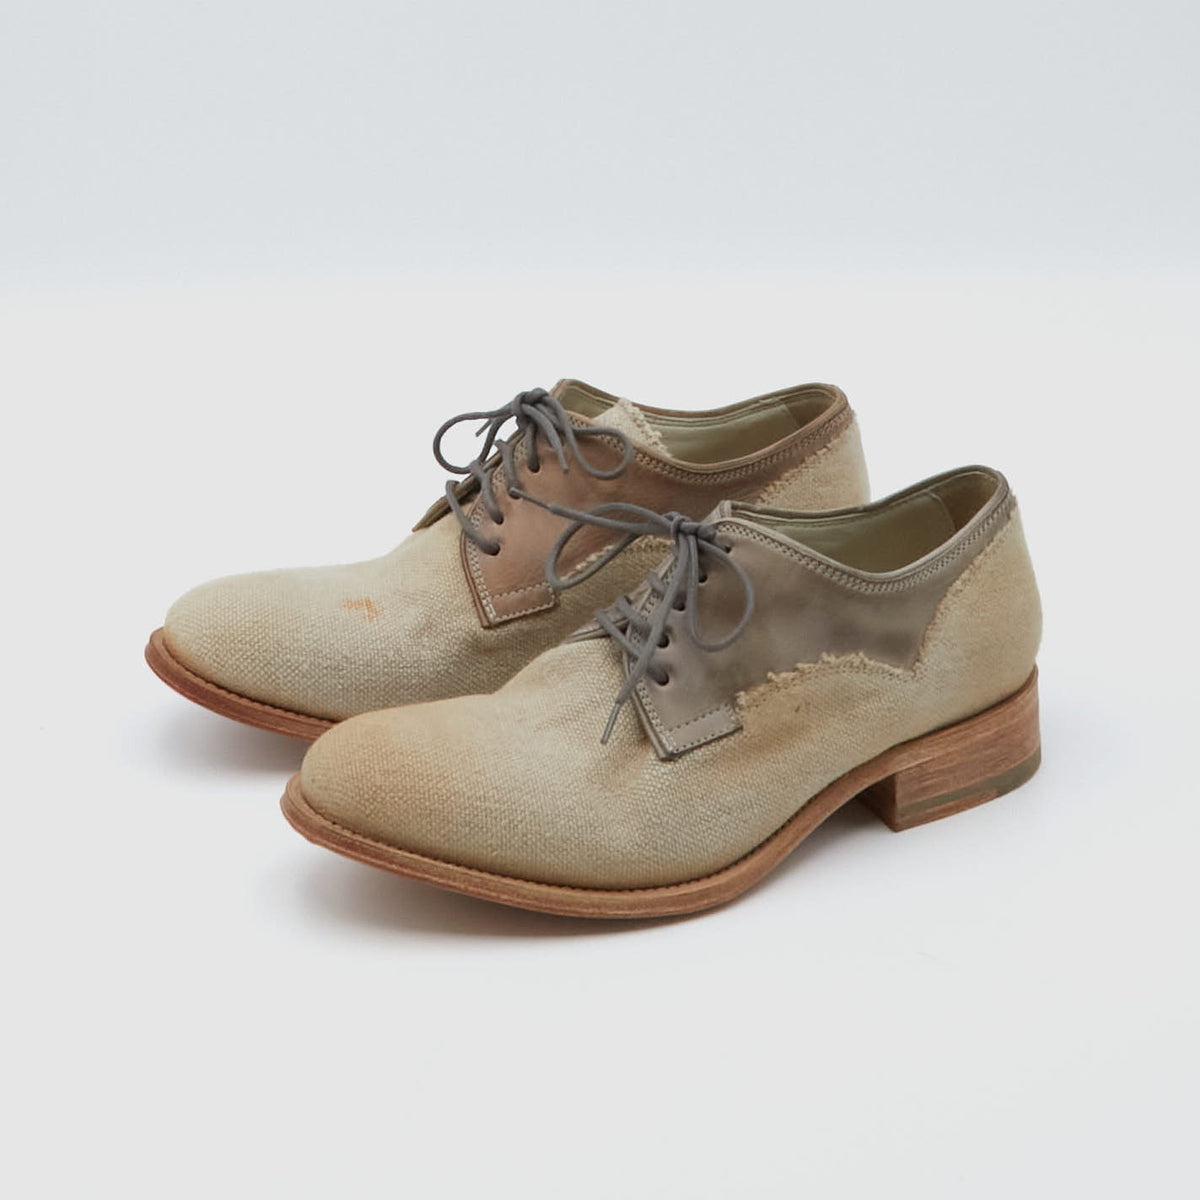 n.d.c Ladies Leather Lined Linen Shoe Made by Hand